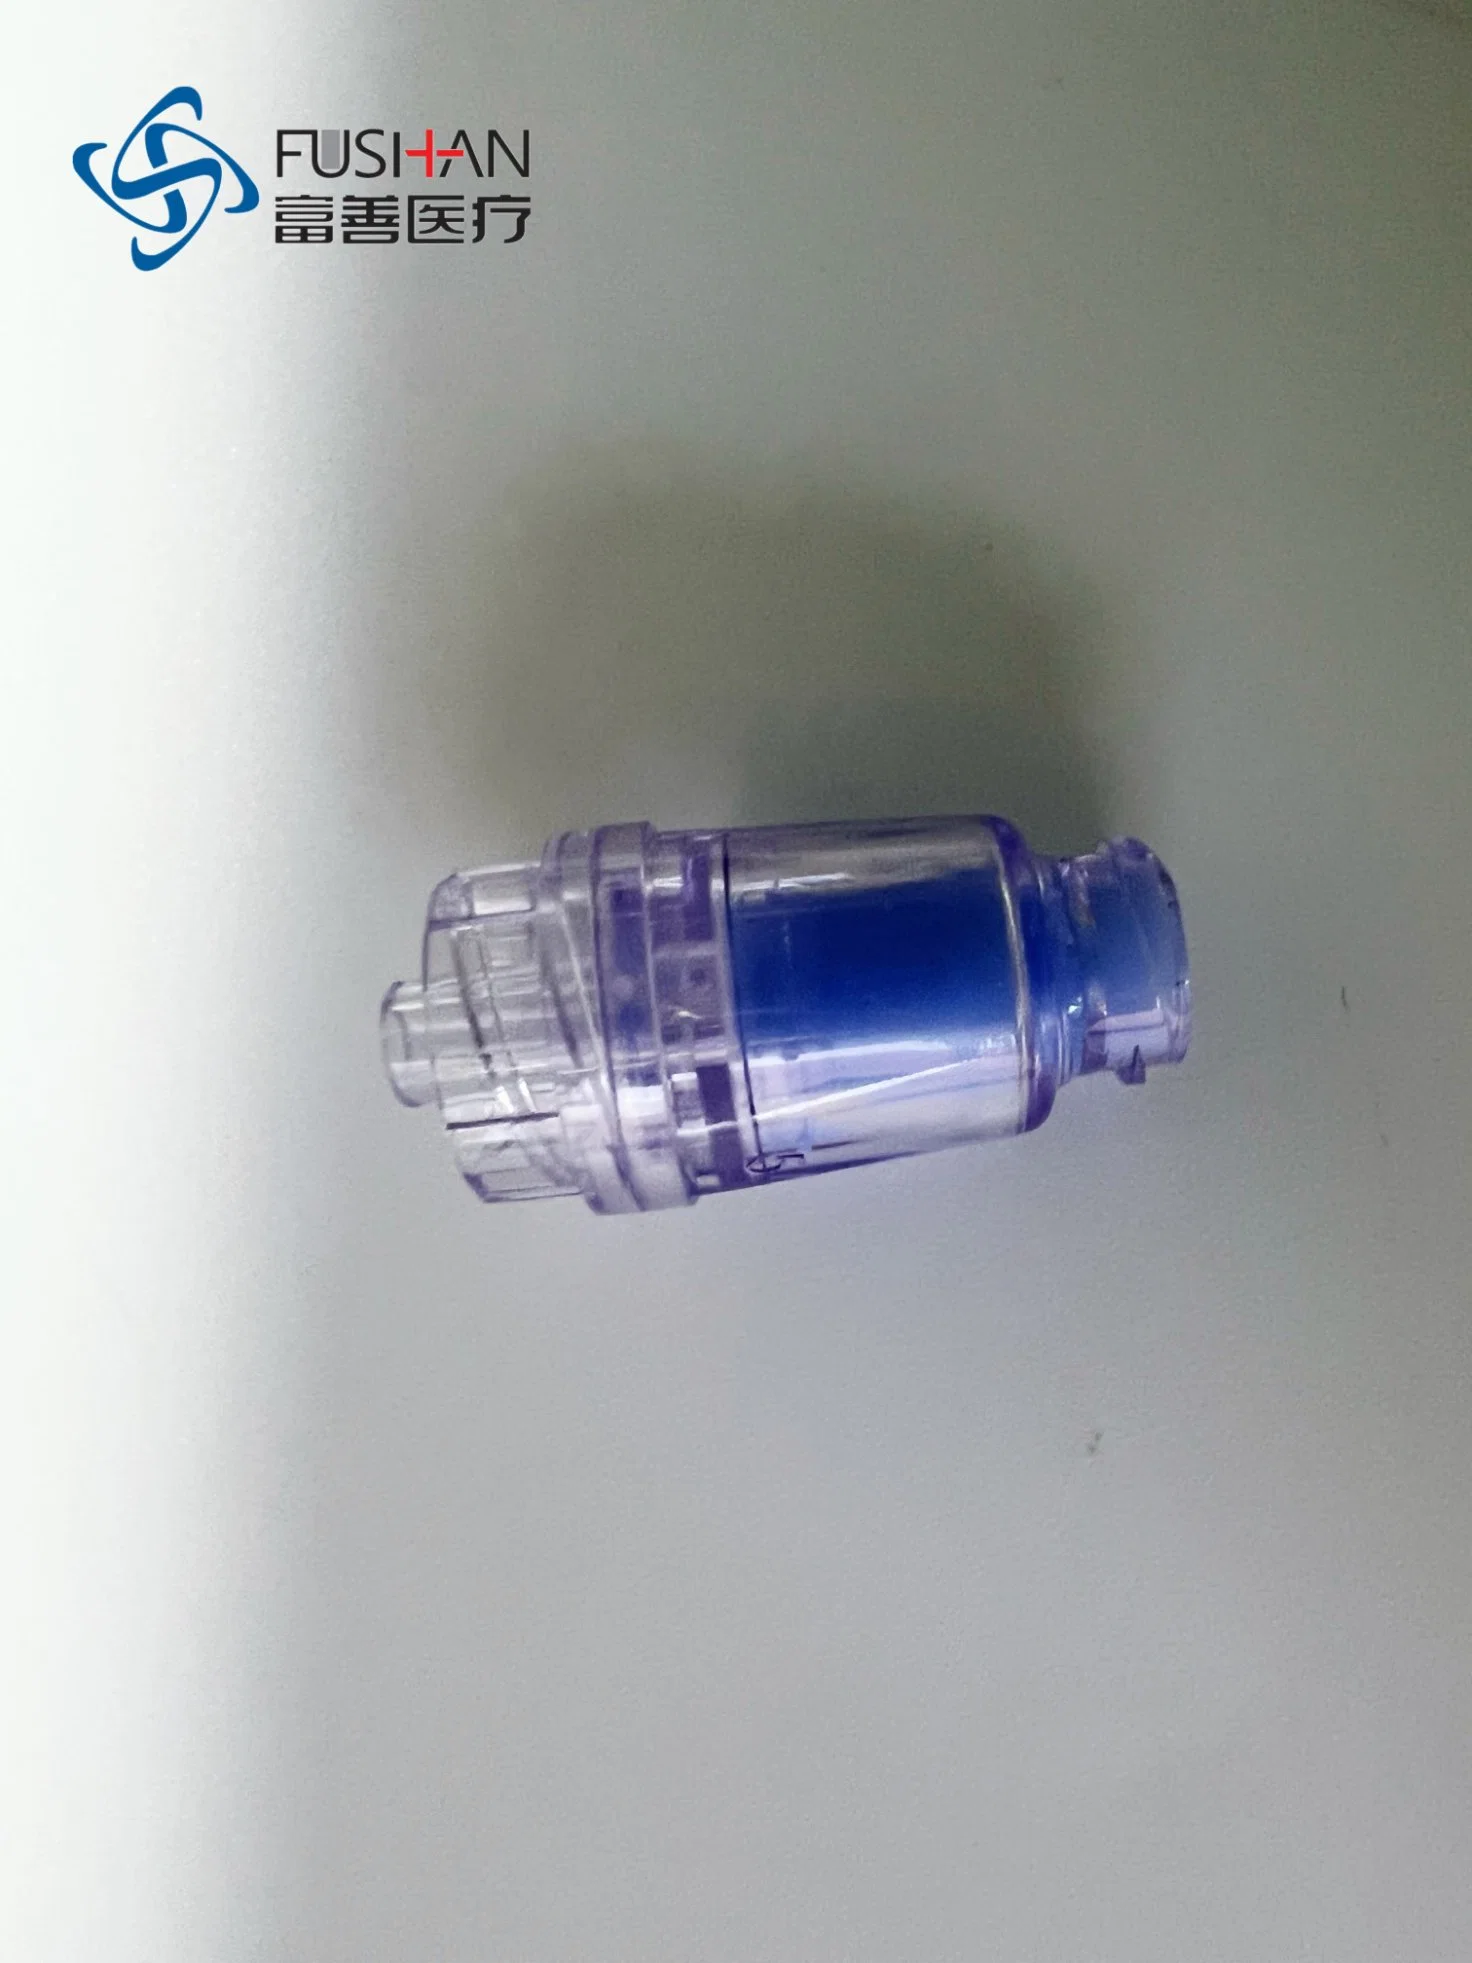 Disposable Plastic Needle Free Connector Fushan Medical CE ISO Certificate Best Quality to Peripheral Venous Catheter, Central Venous Catheter, IV Cannula